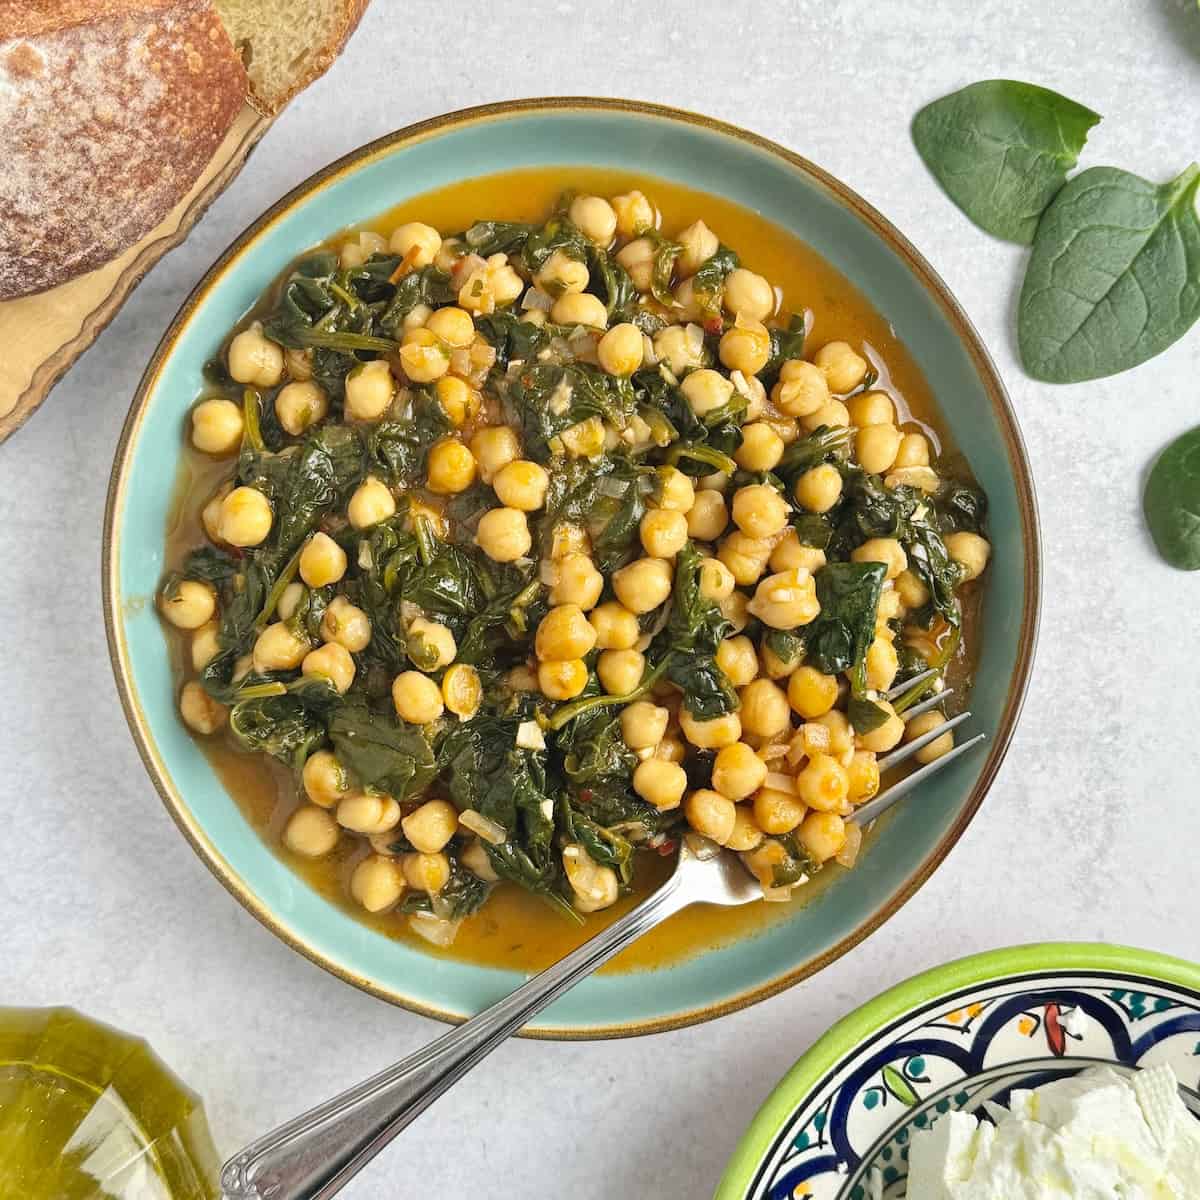 Spinach and chickpea stew served in a bowl with slices of bread and olive oil in the background.